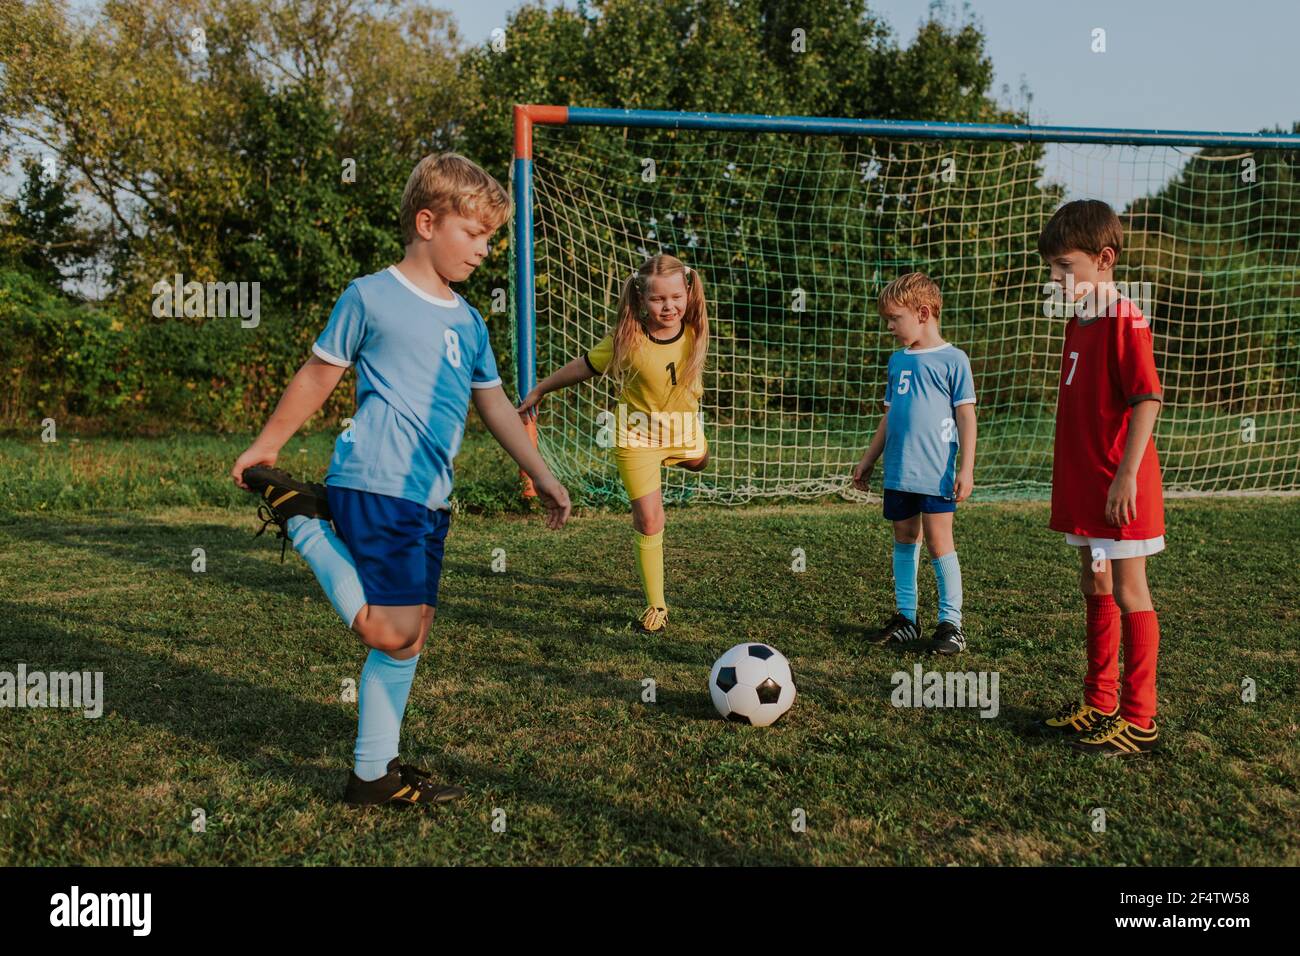 Children exercising together outside at football goal. Group of kids in soccer dresses stretching together at amateur competition in field at sunset. Stock Photo